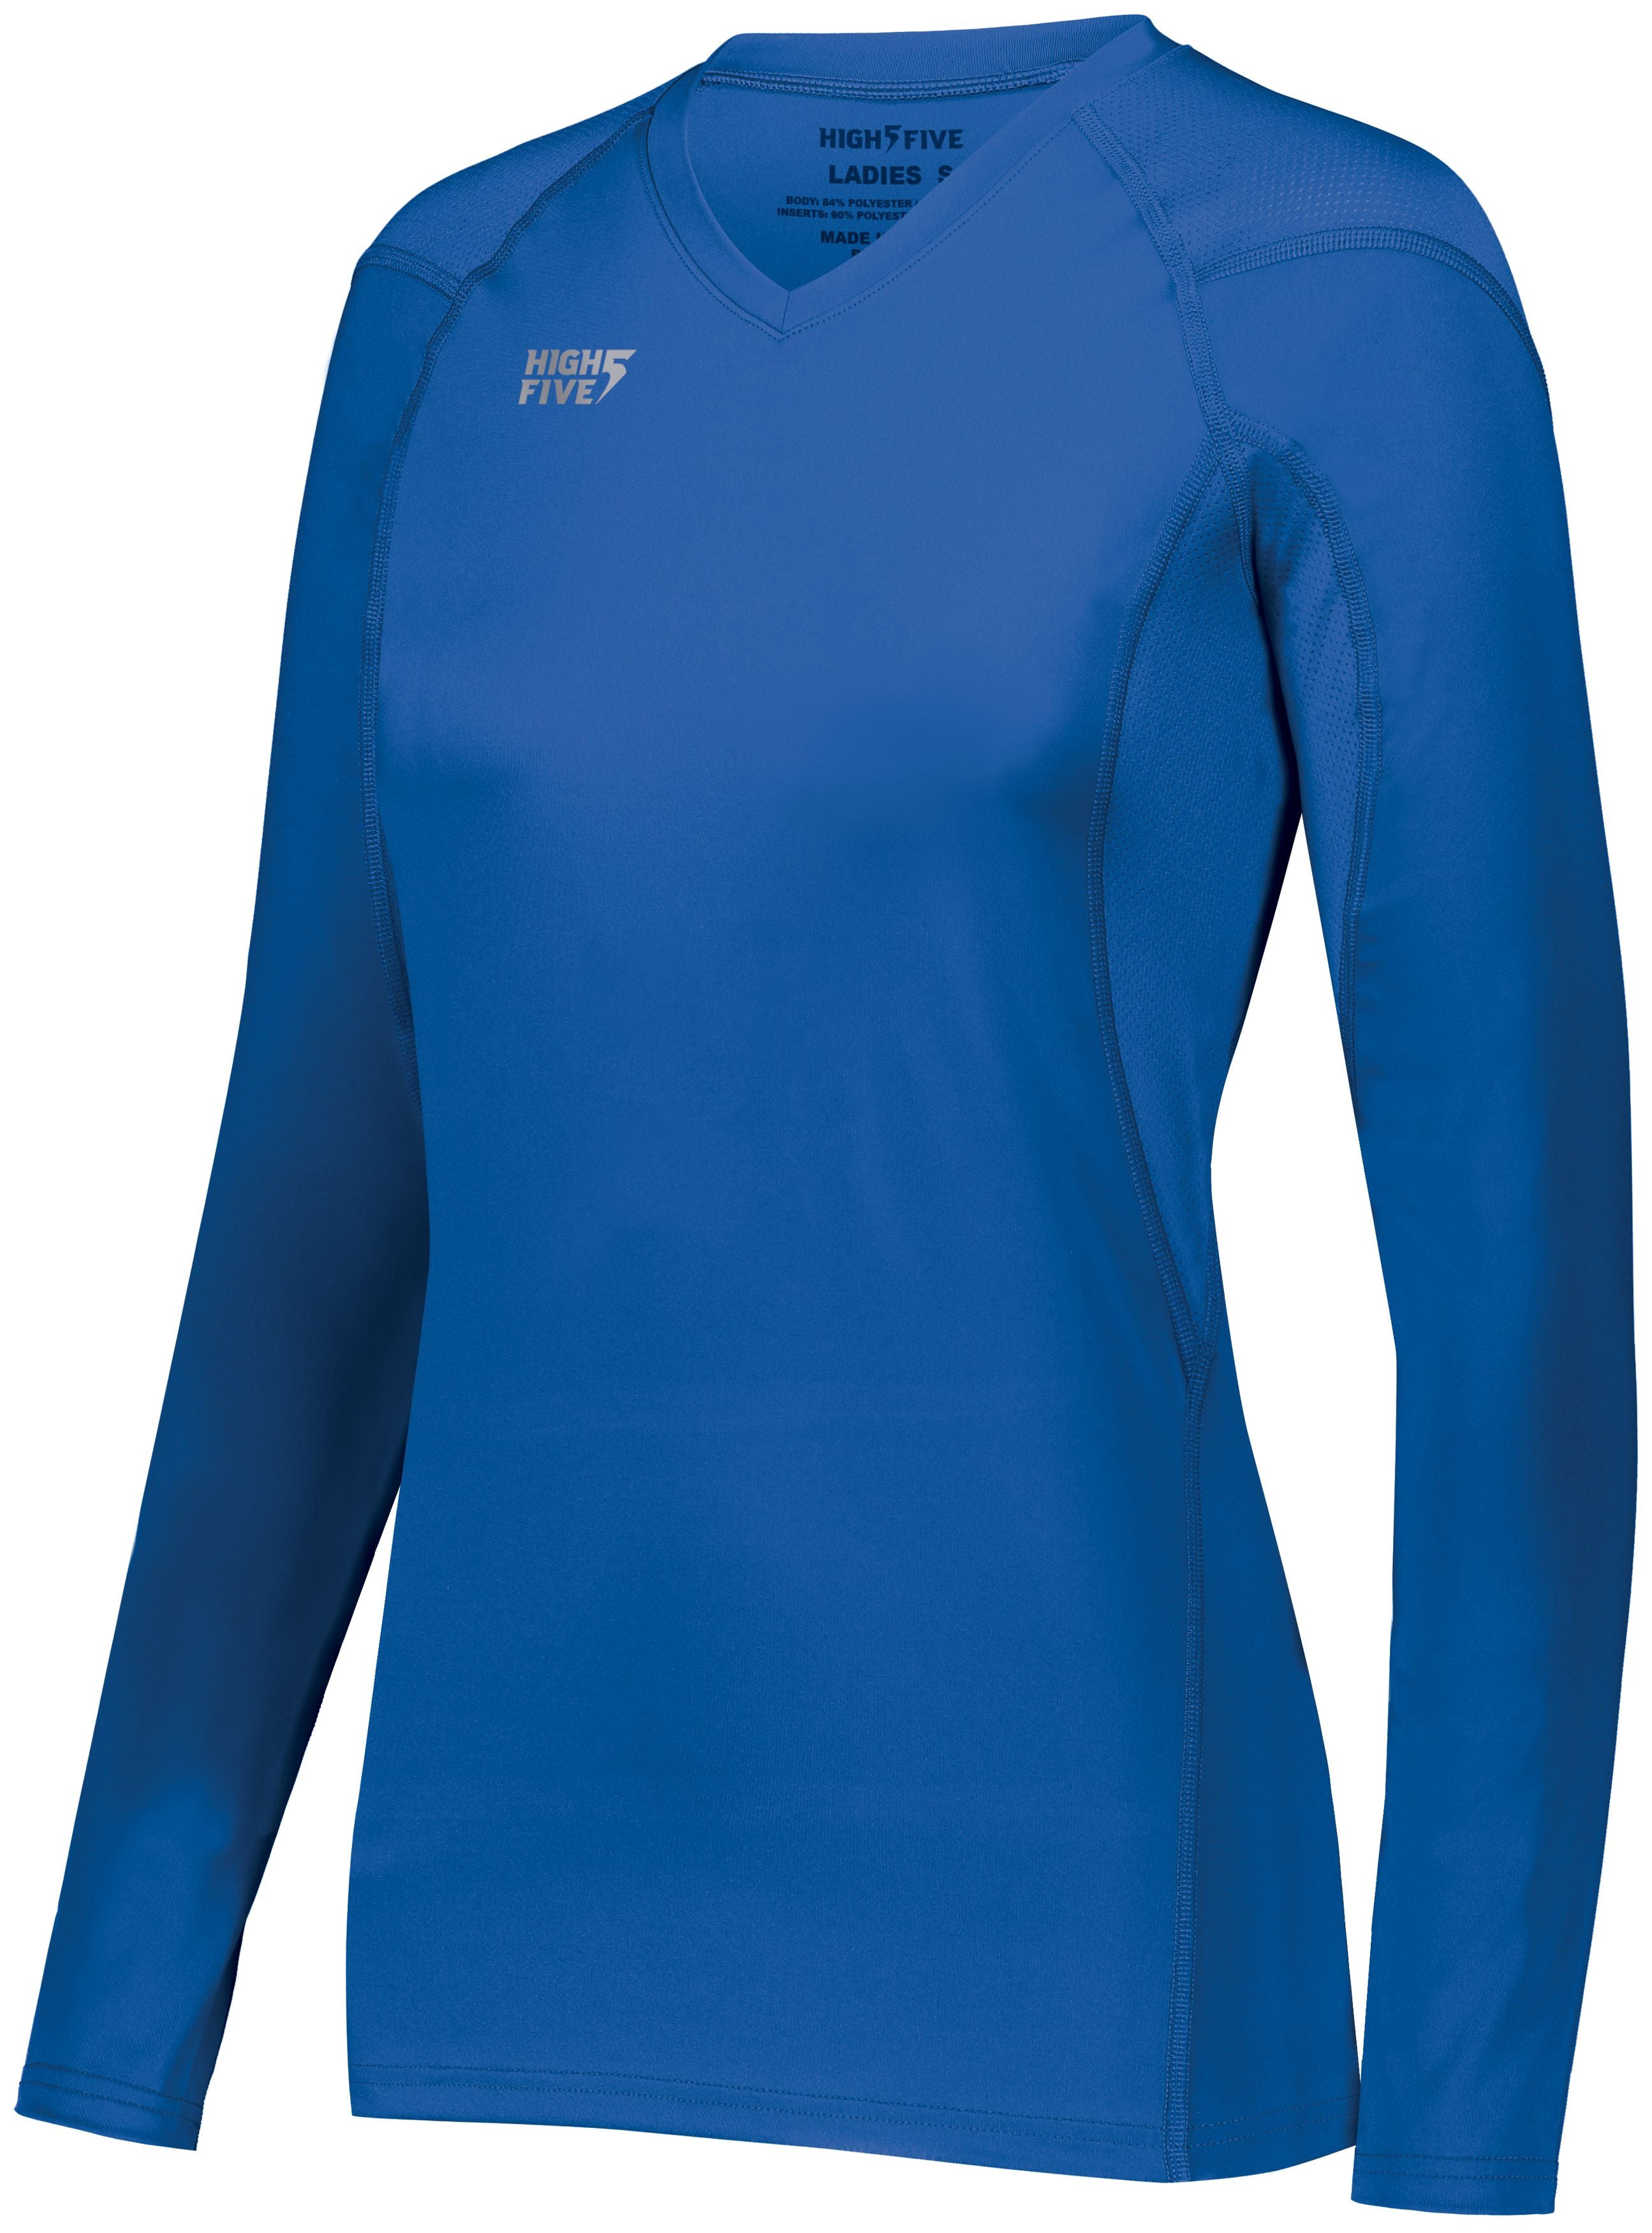 High 5 Ladies Truhit Long Sleeve Jersey in Royal  -Part of the Ladies, Ladies-Jersey, High5-Products, Volleyball, Shirts product lines at KanaleyCreations.com